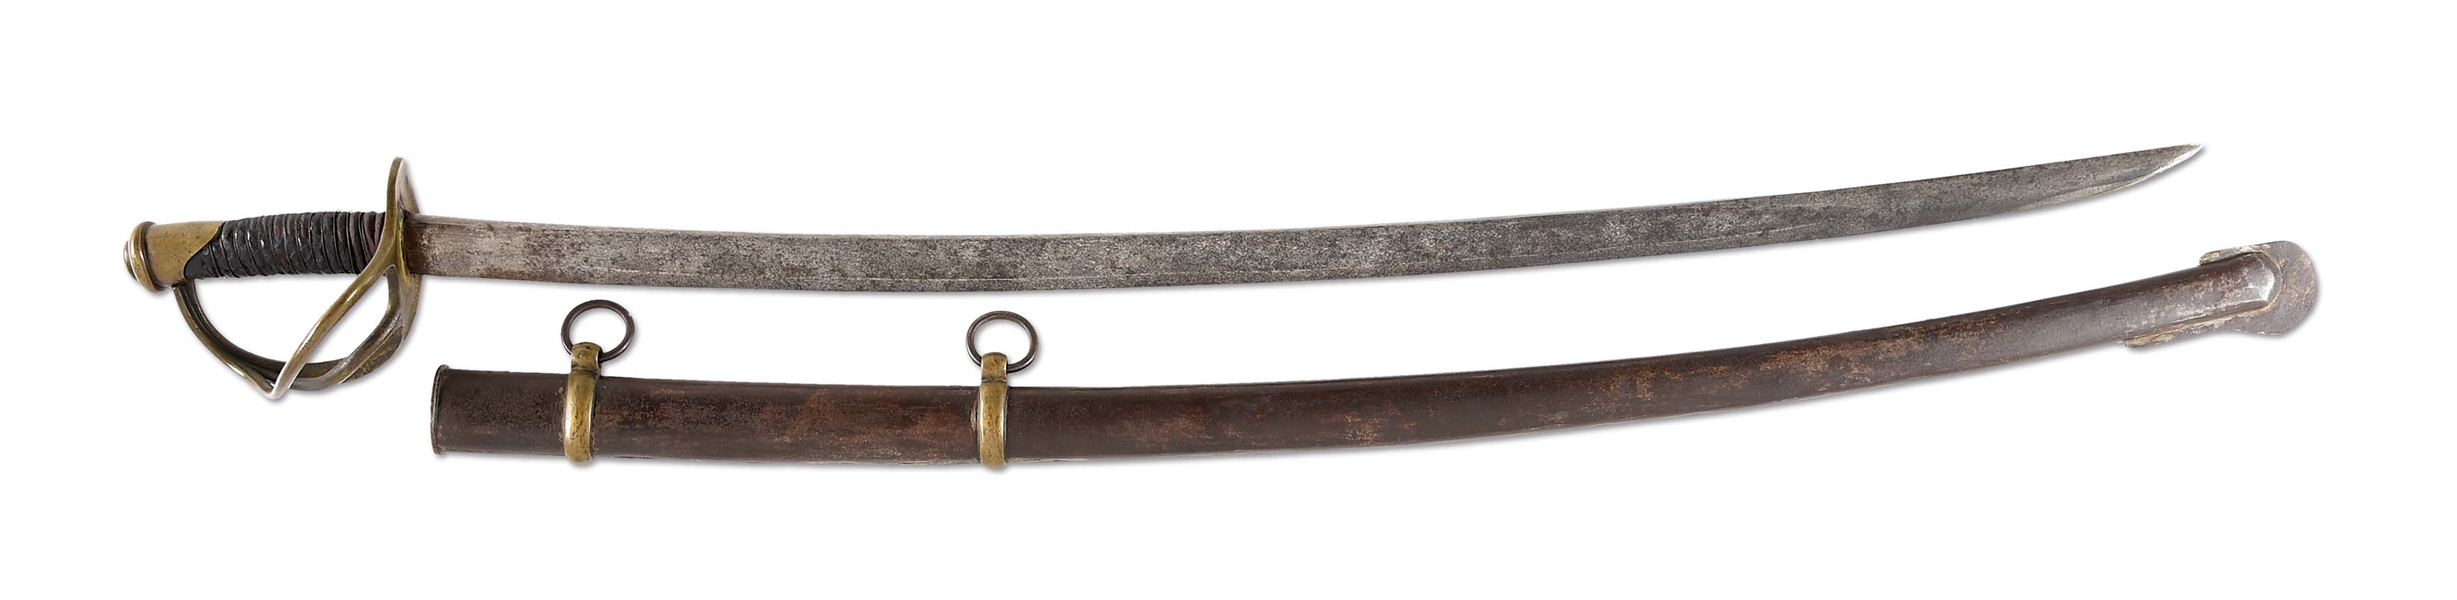 SCARCE CONFEDERATE HAIMAN BROTHERS CAVALRY SABER WITH SCABBARD.